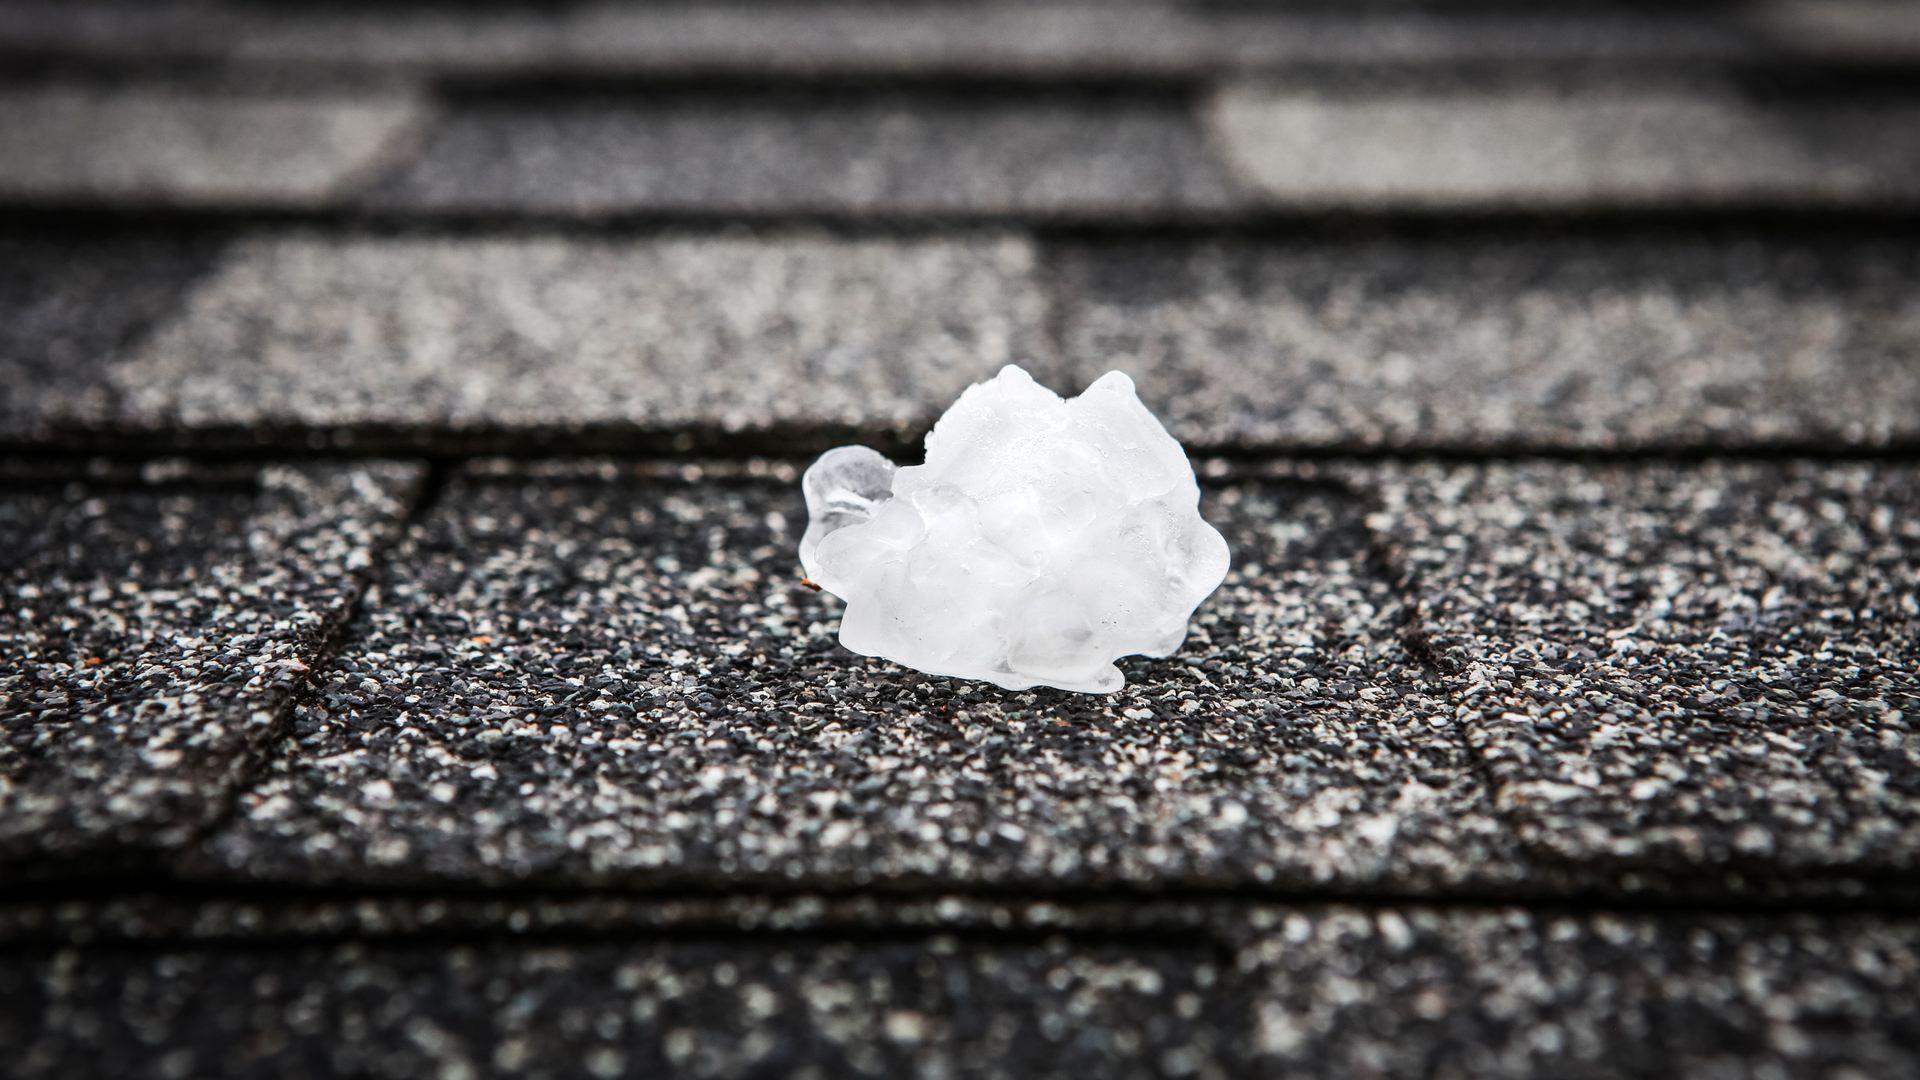 Has Your Houston Roof Experienced Hail Roof Damage?